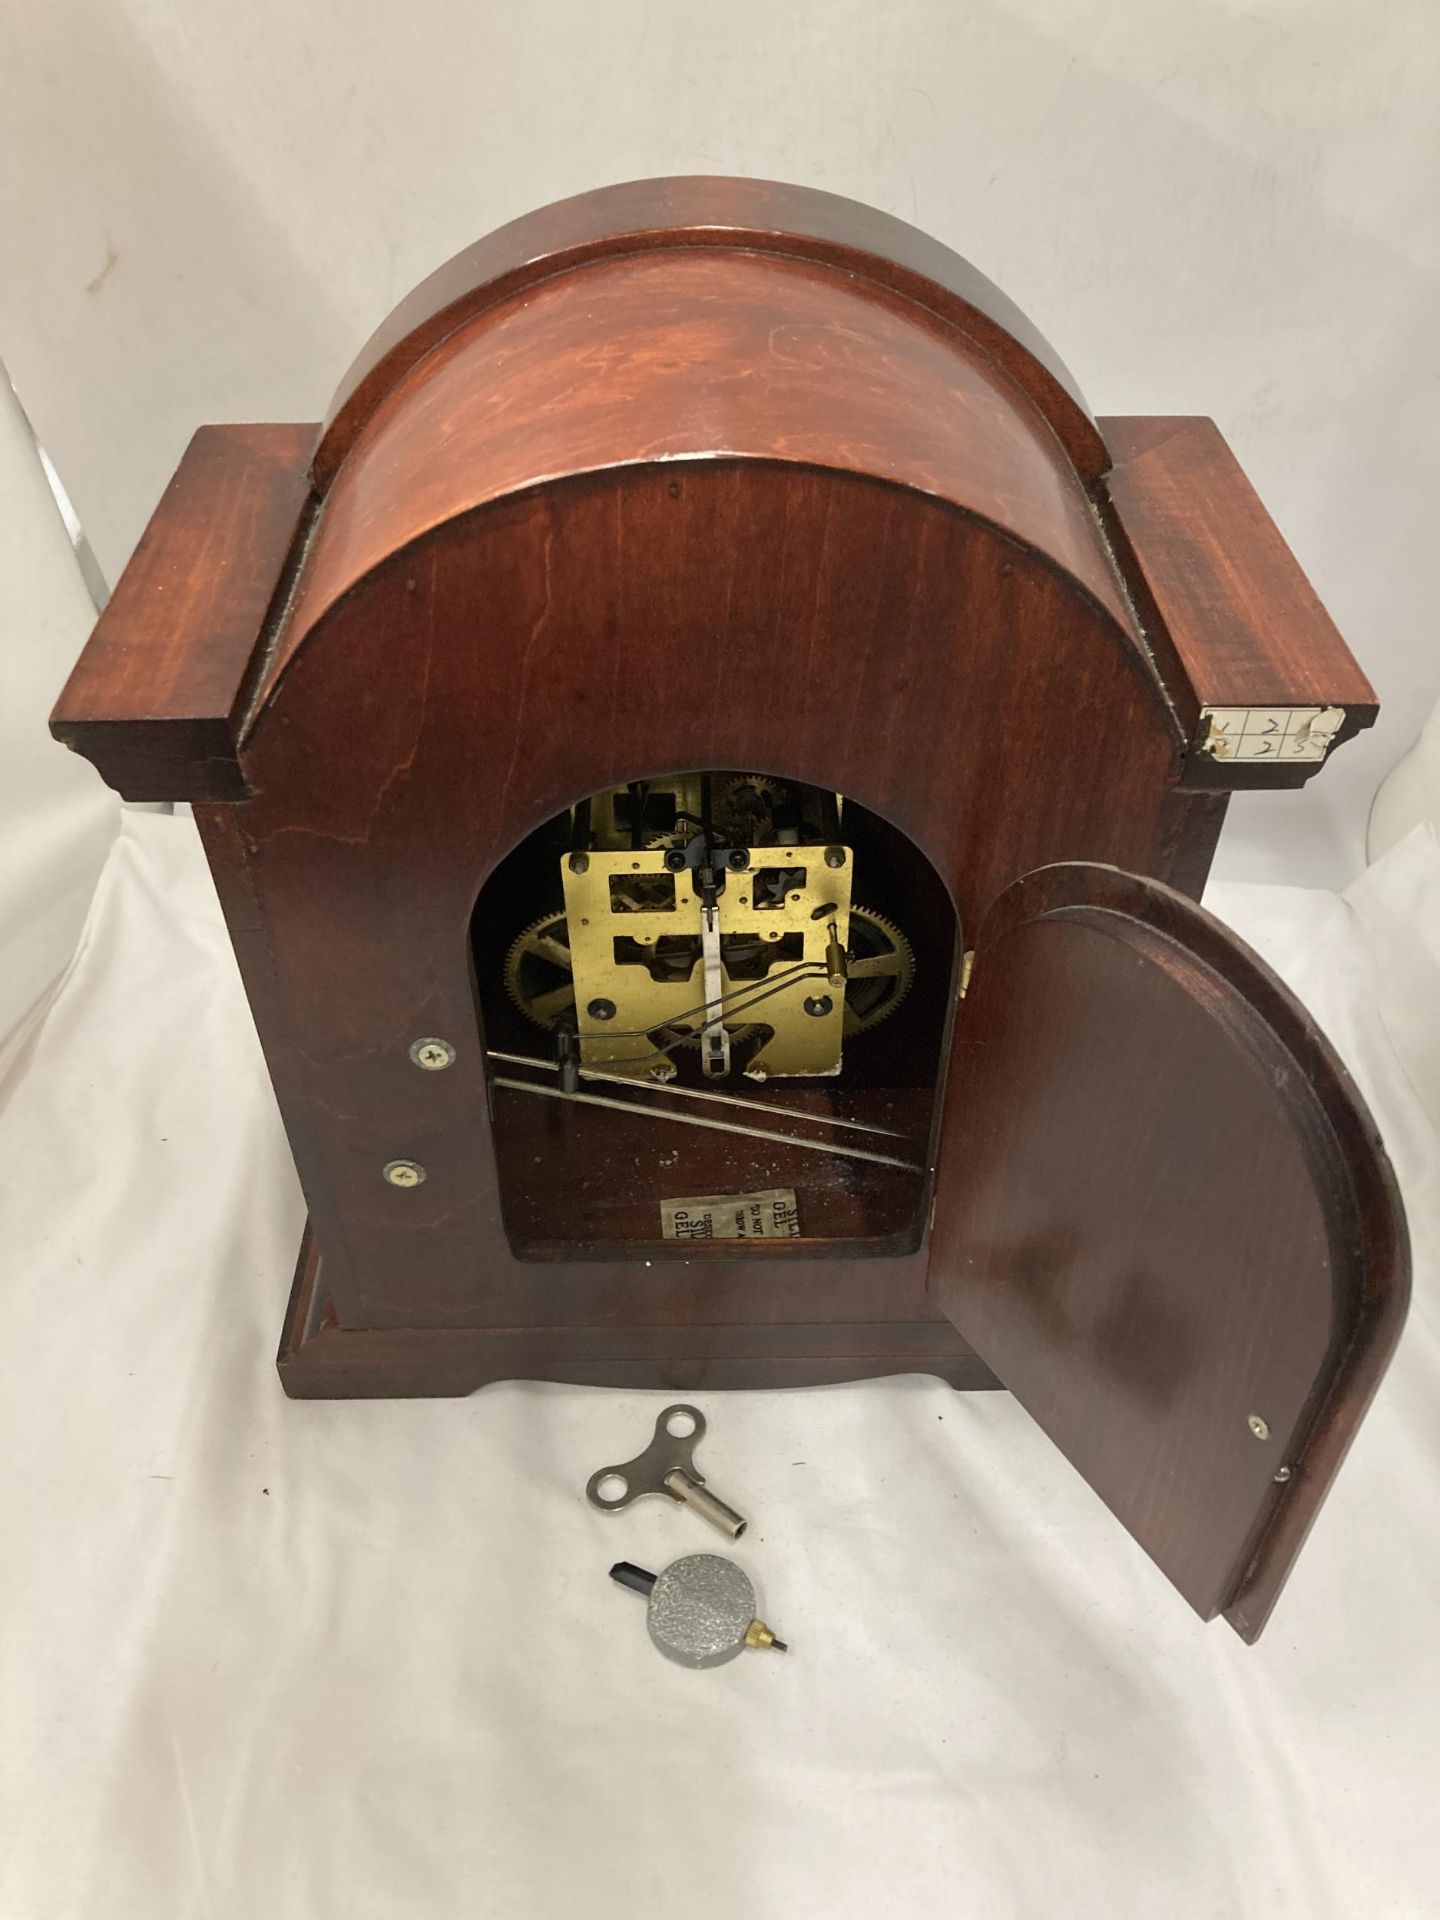 A C. WOOD & SON 31 DAY MANTLE CLOCK WITH KEY AND PENDULUM - Image 3 of 3